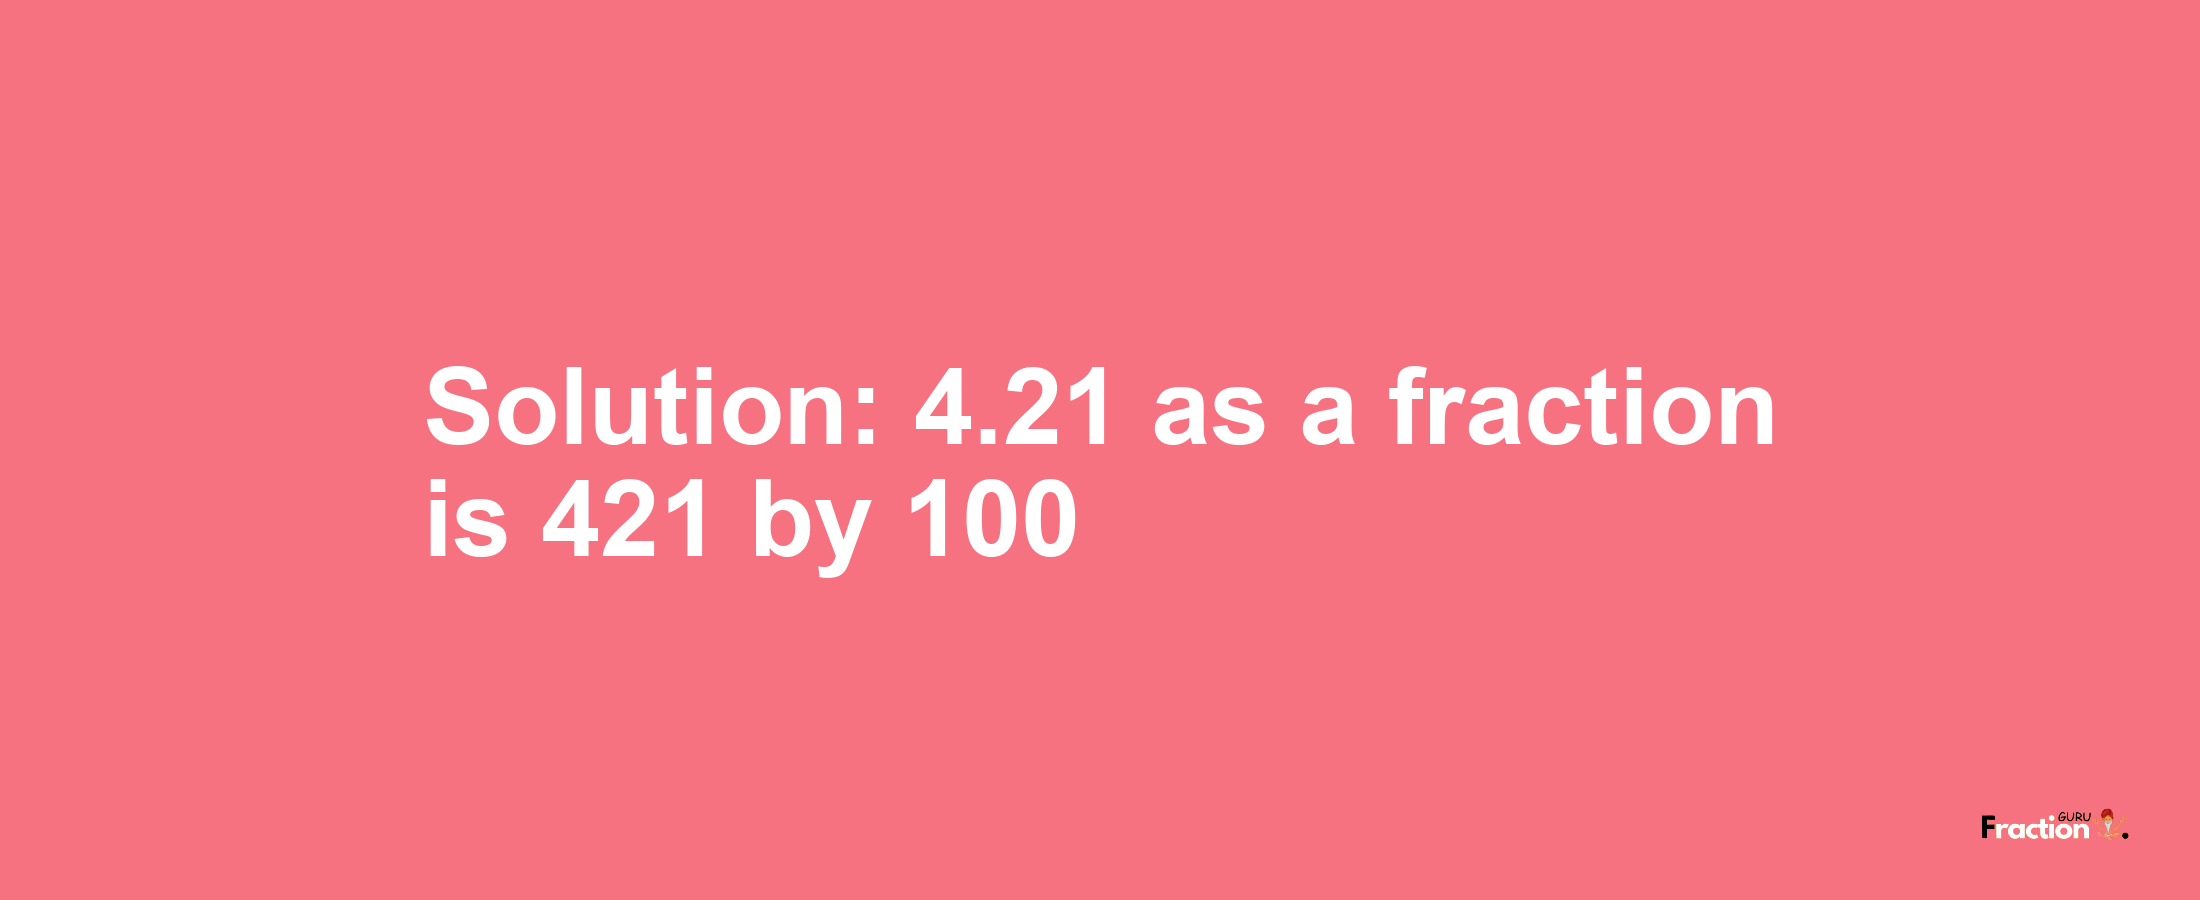 Solution:4.21 as a fraction is 421/100